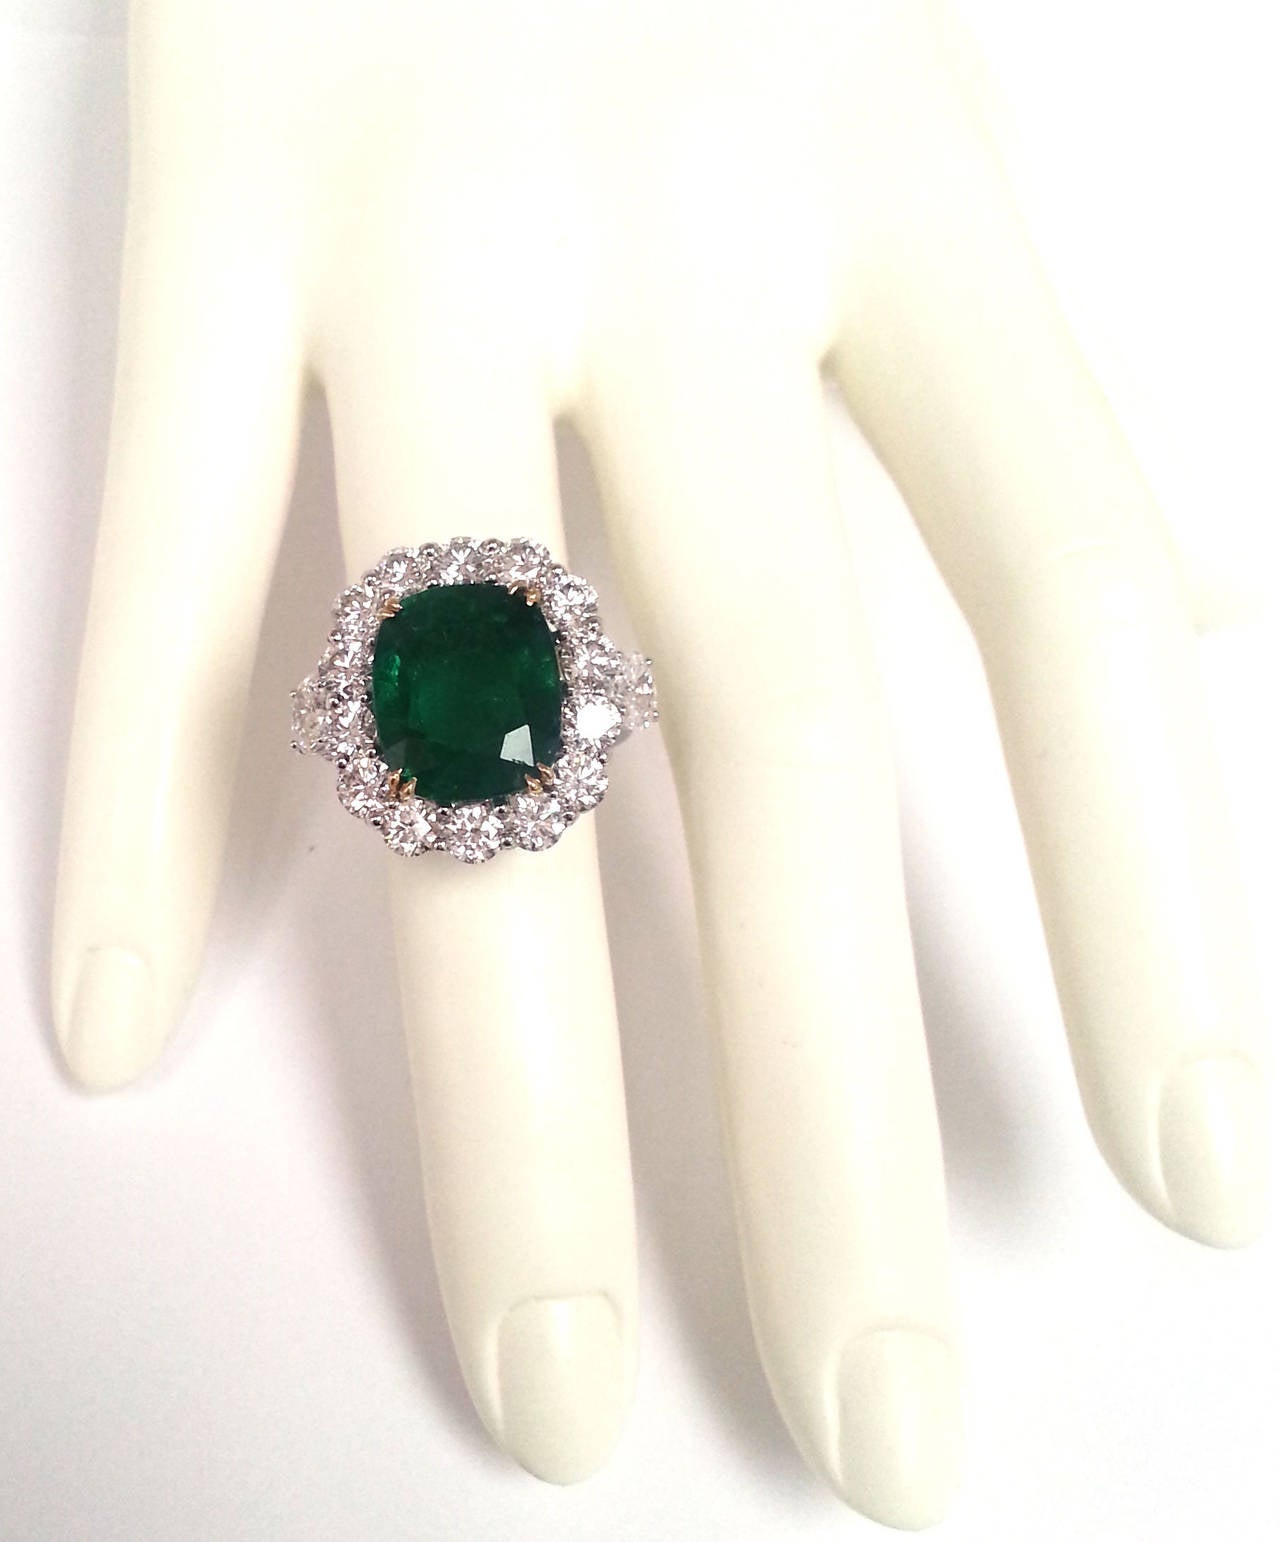 Hand made Platinum ring featuring a diamond halo of large stones and two oval diamonds as side stones. The center emerald has an ideal emerald color of deep green shade and it weights 8.62ct t.w. The total diamond carat weight of the ring is